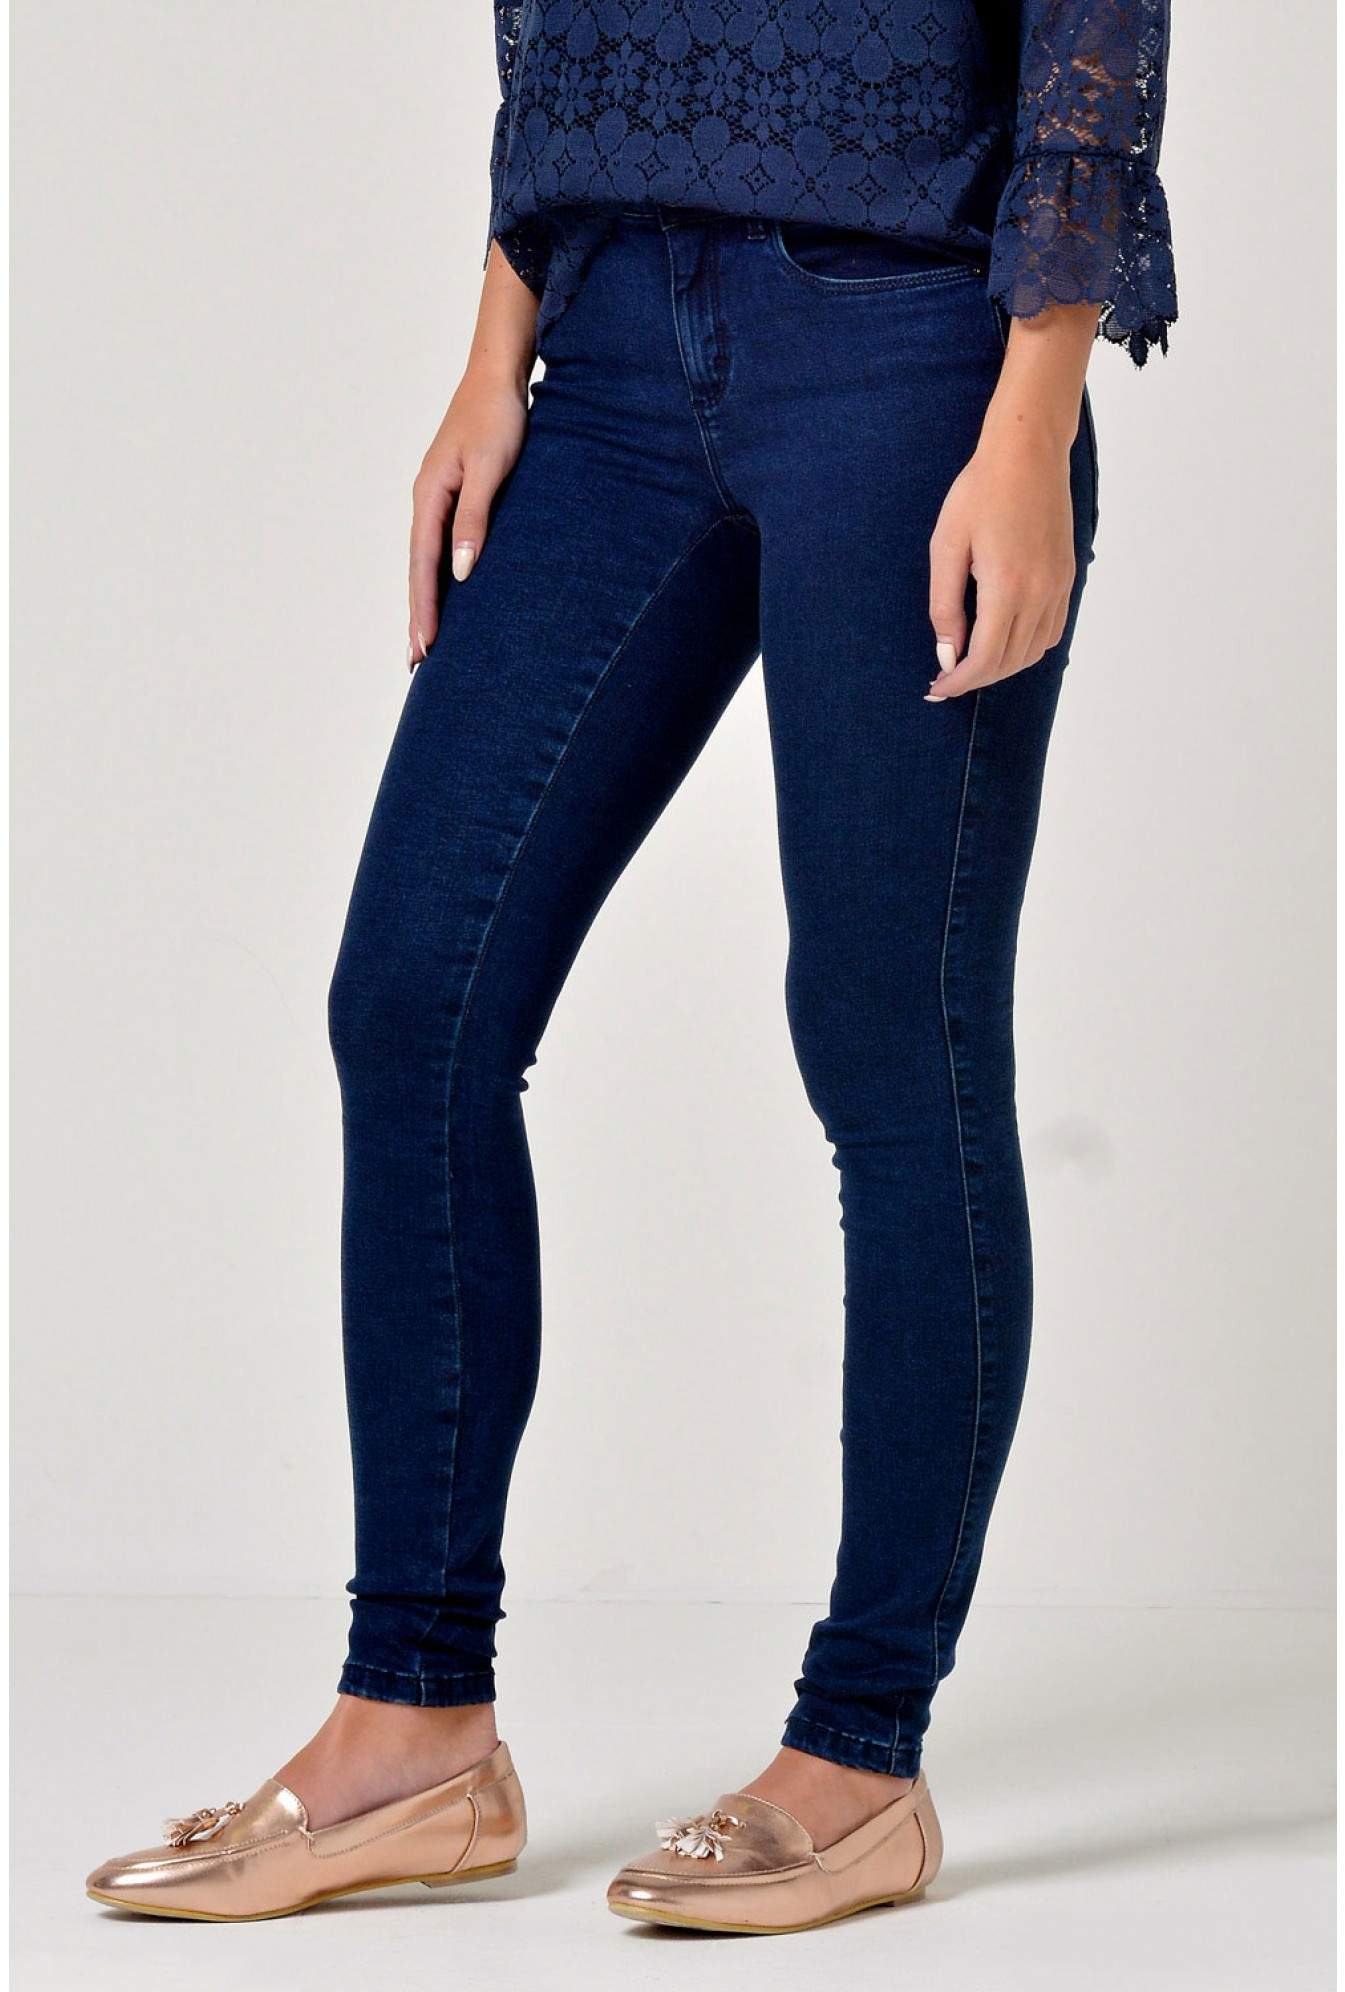 Only Royal Deluxe Regular Jeans in Dark Blue | iCLOTHING